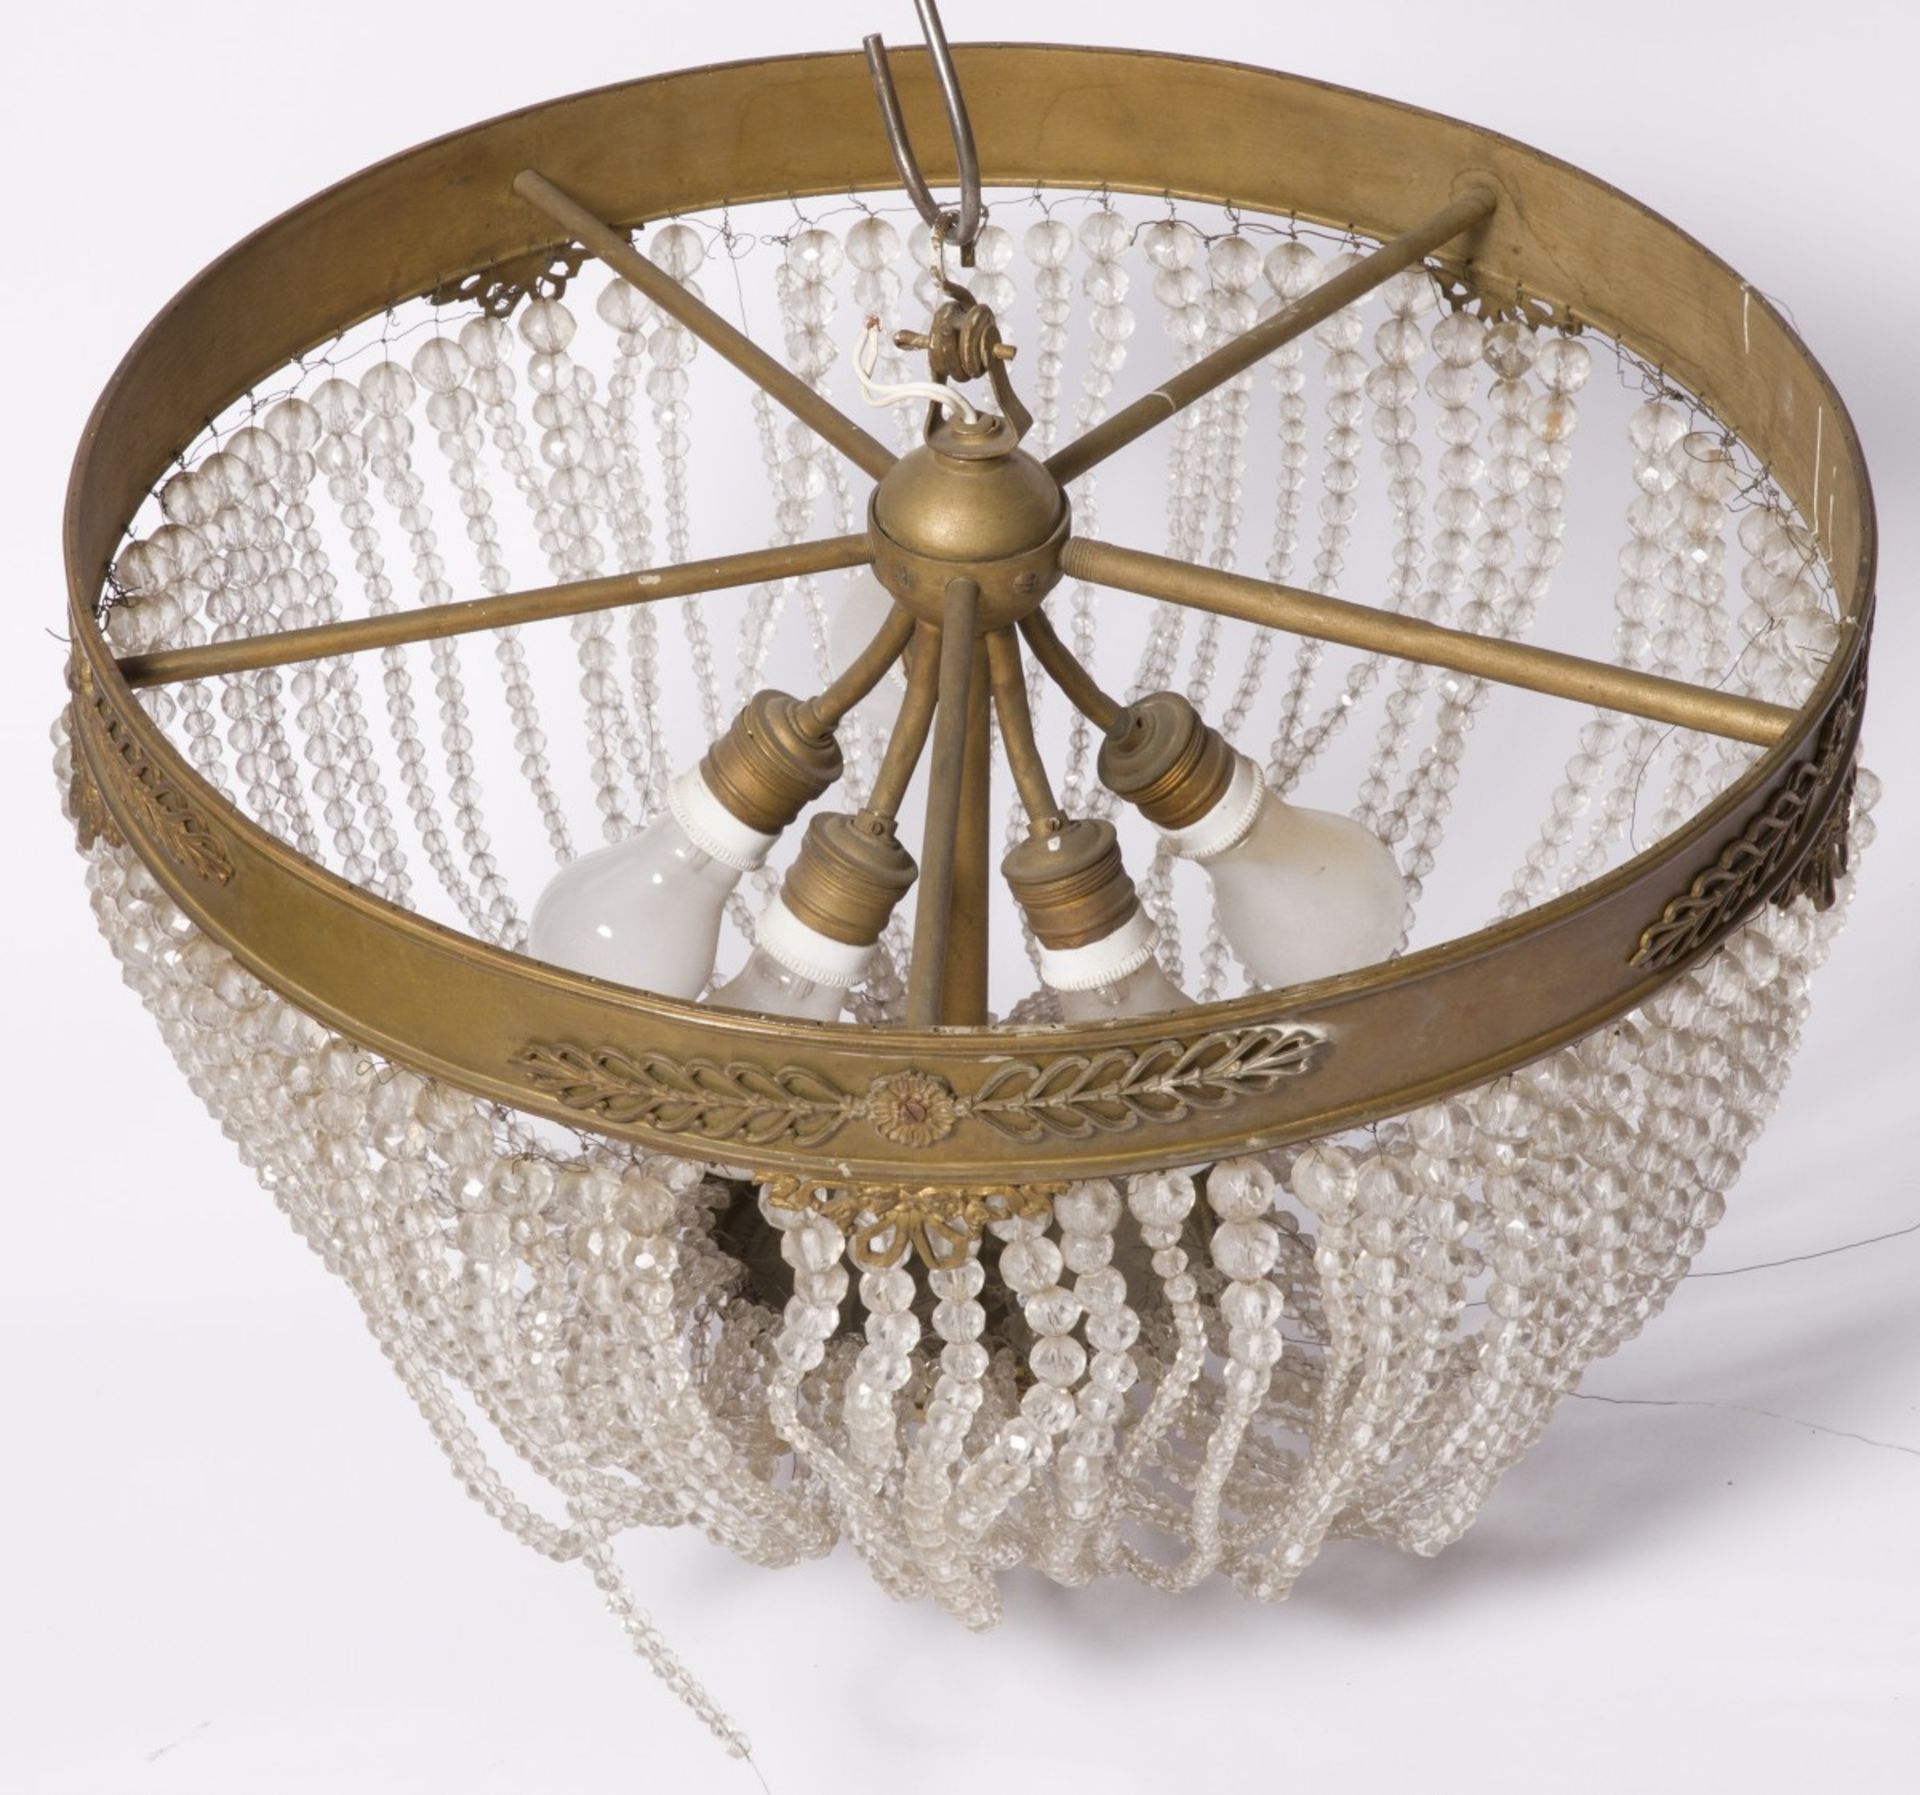 An Empire-style basket chandelier, France, 20th century.